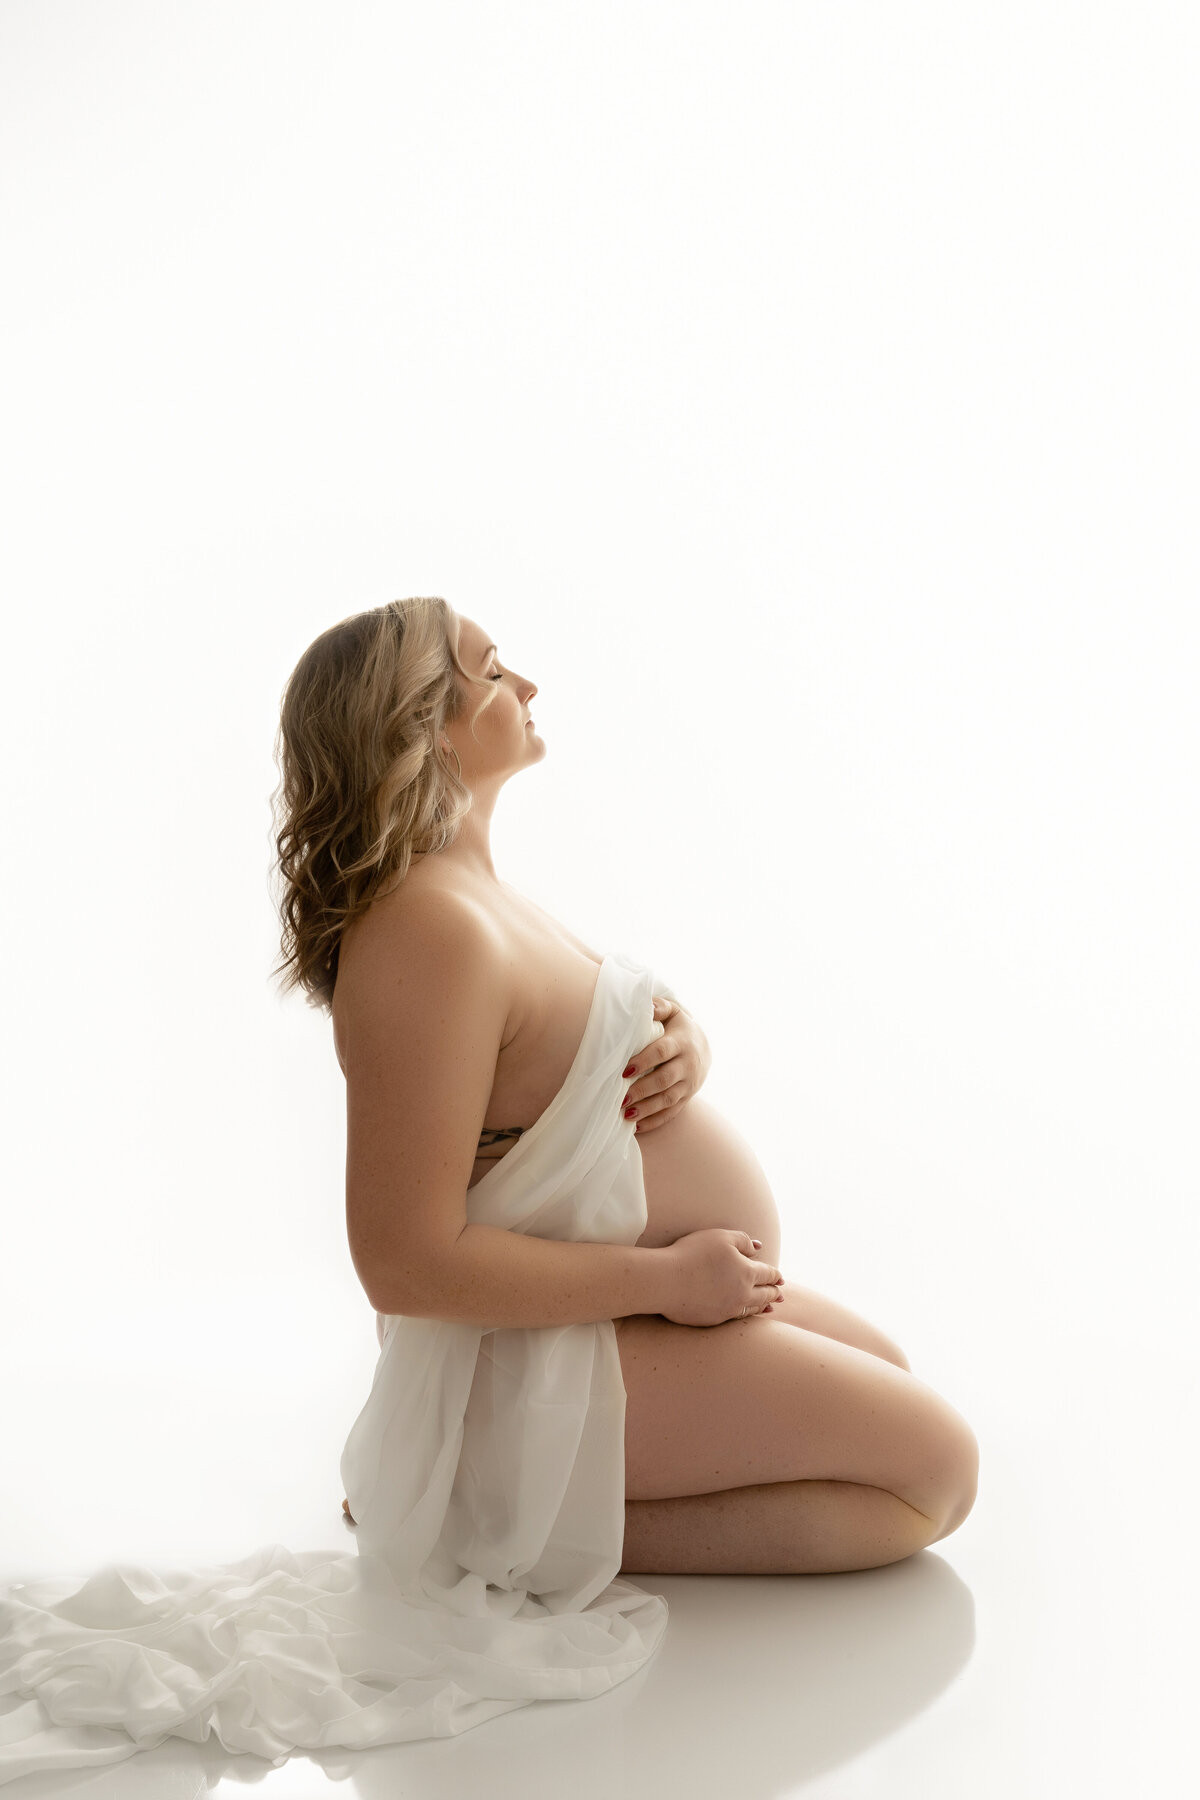 A pregnant woman kneels on the floor of a white studio while covering herself with a long white sheet